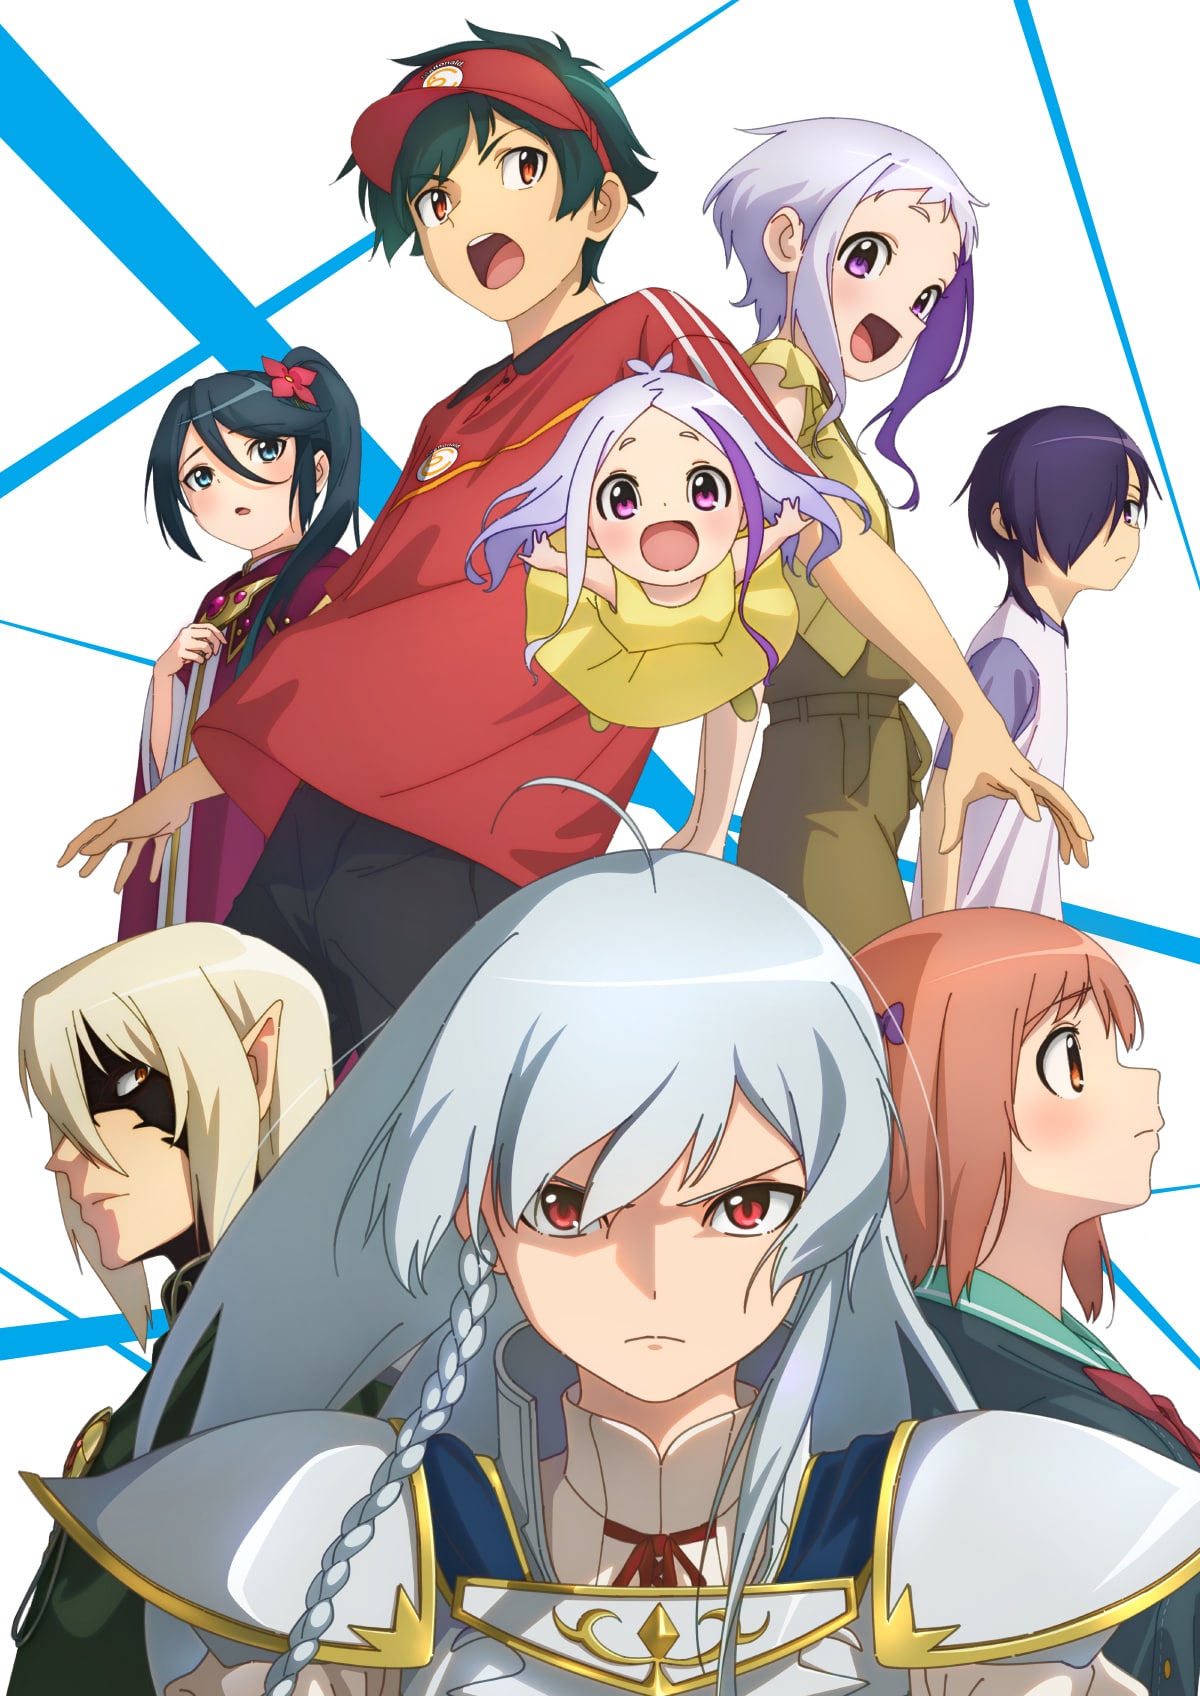 The Devil Is a Part-Timer Season 3 Reveals Updated Key Visual